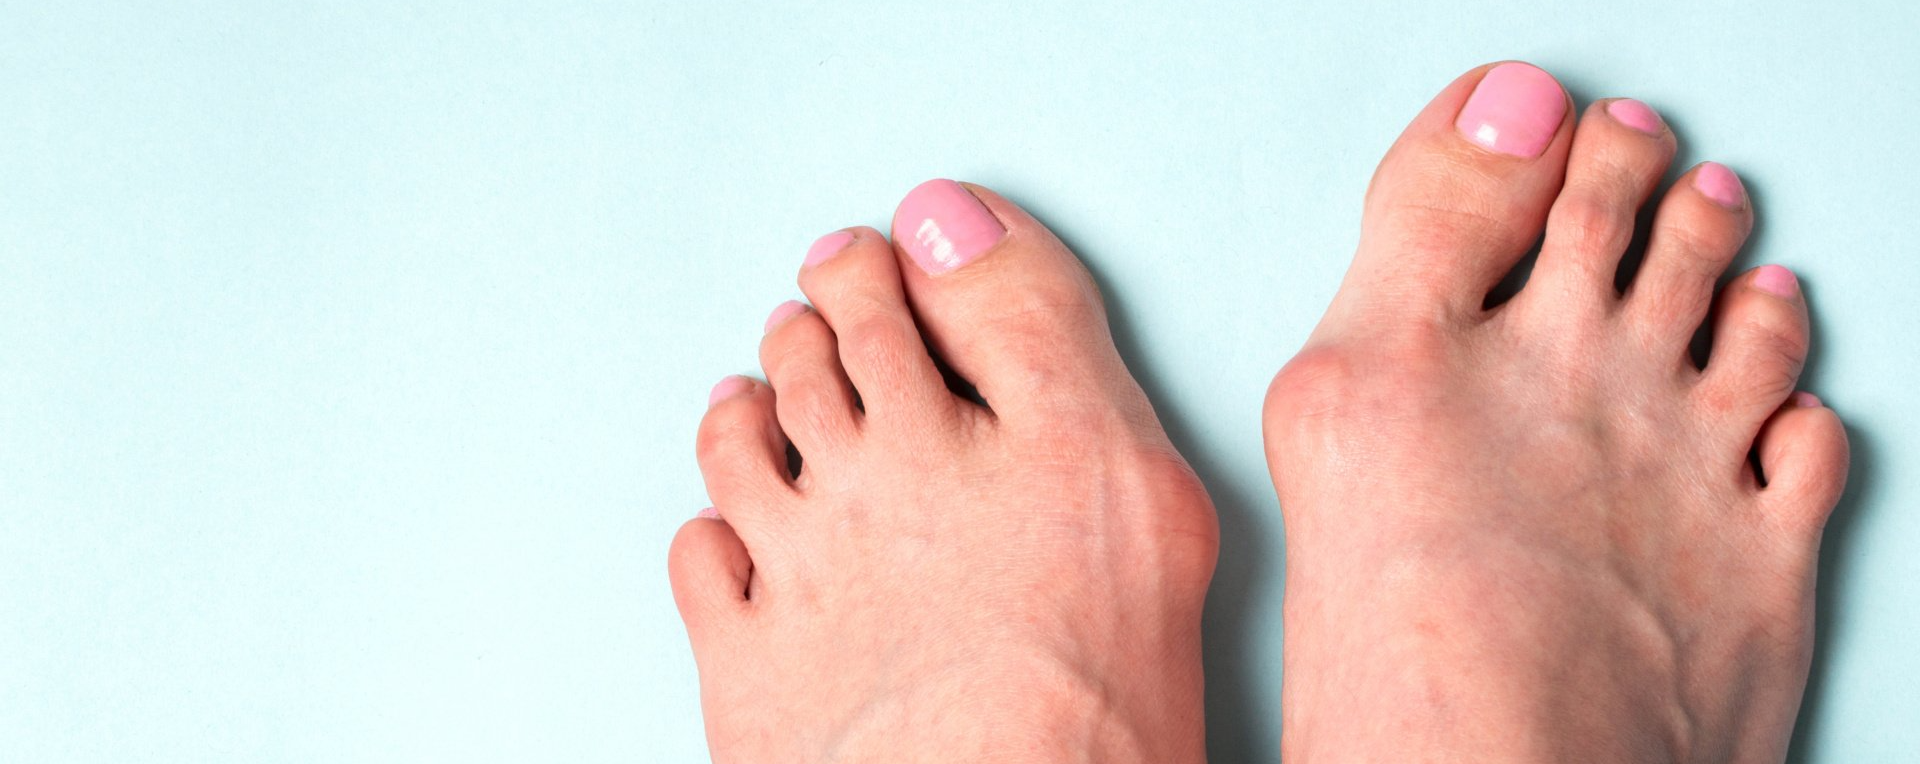 Common treatments for bunions Baton Rouge